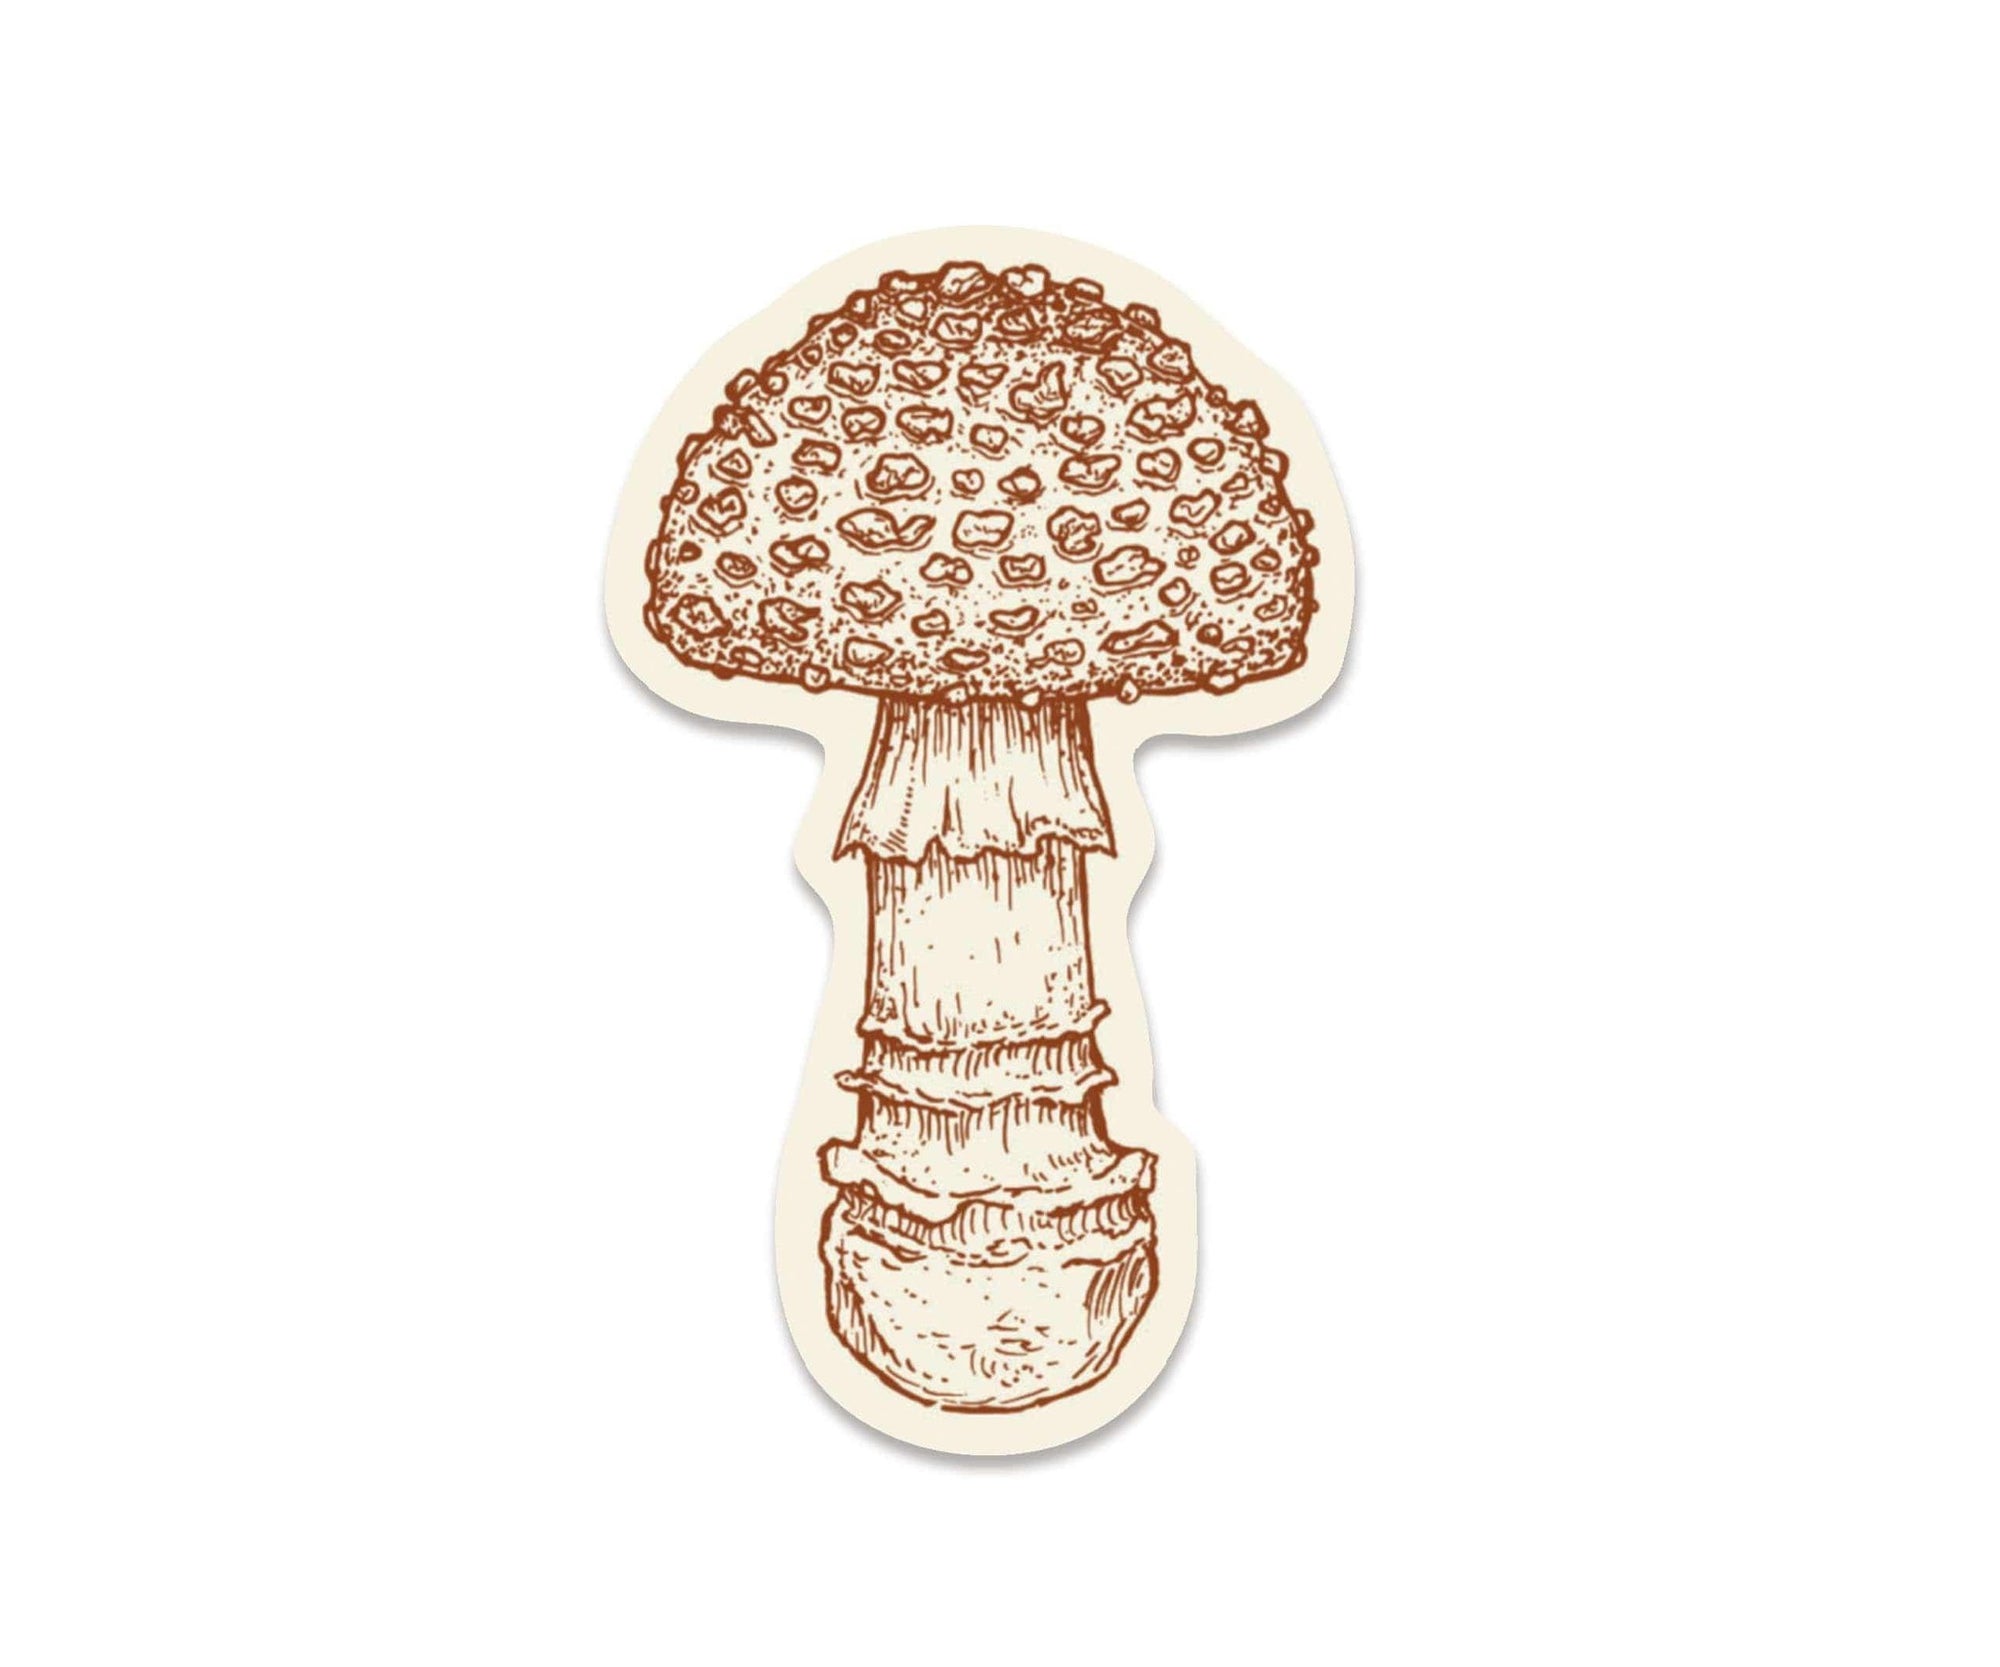 A Spotted Mushroom Sticker with a mushroom on it by The Wild Wander.